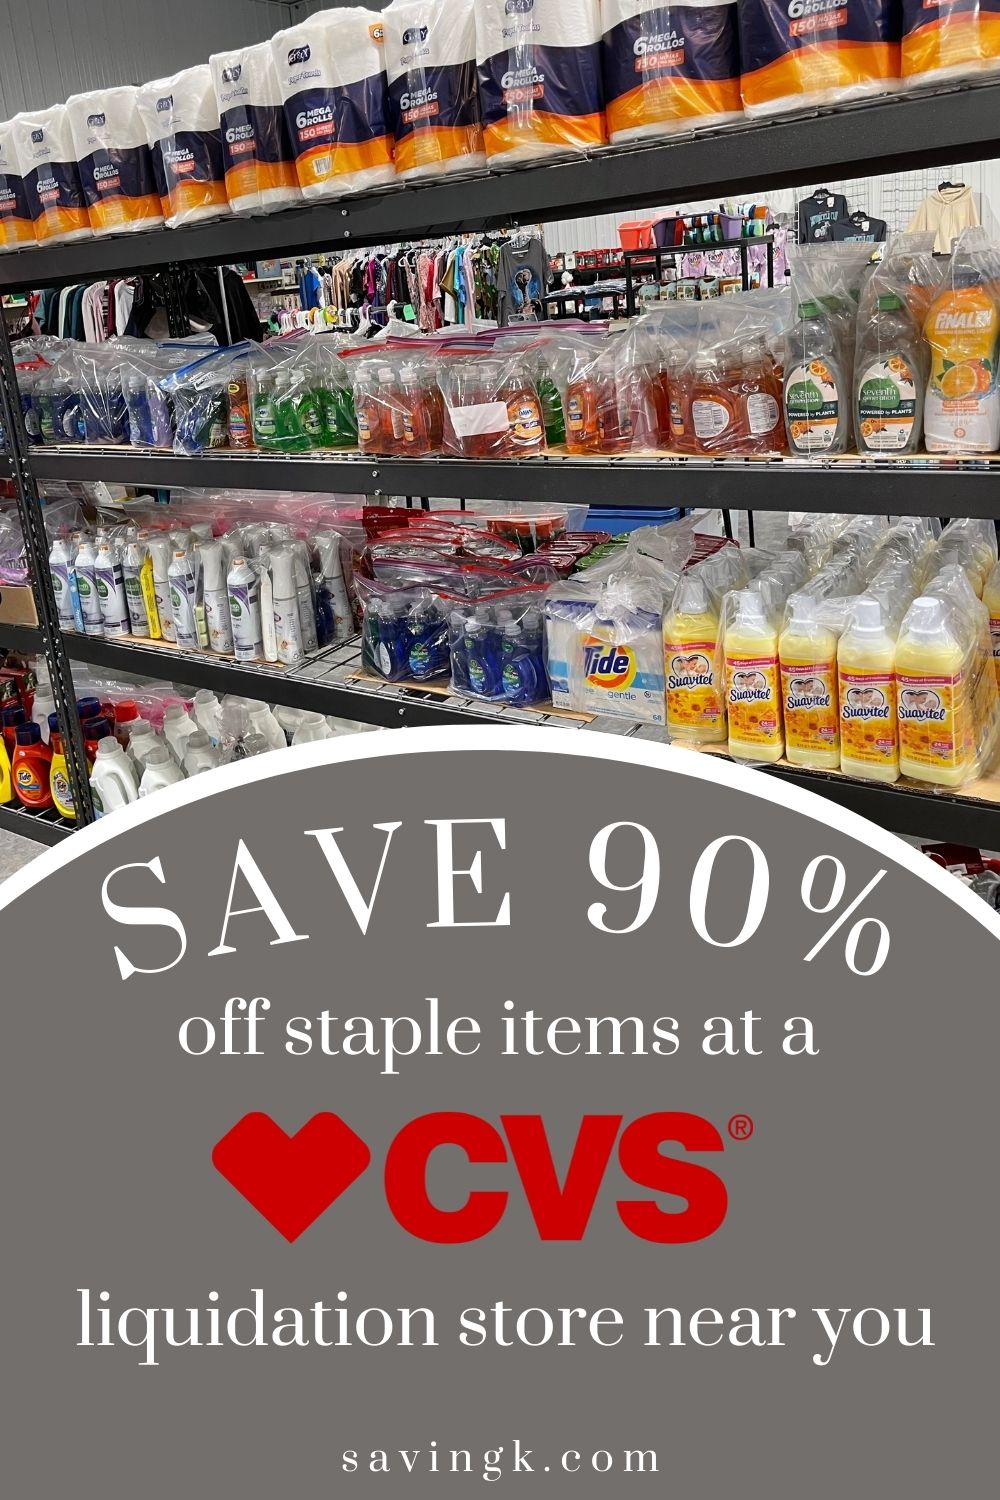 Stock Up For Less At CVS Liquidation Stores